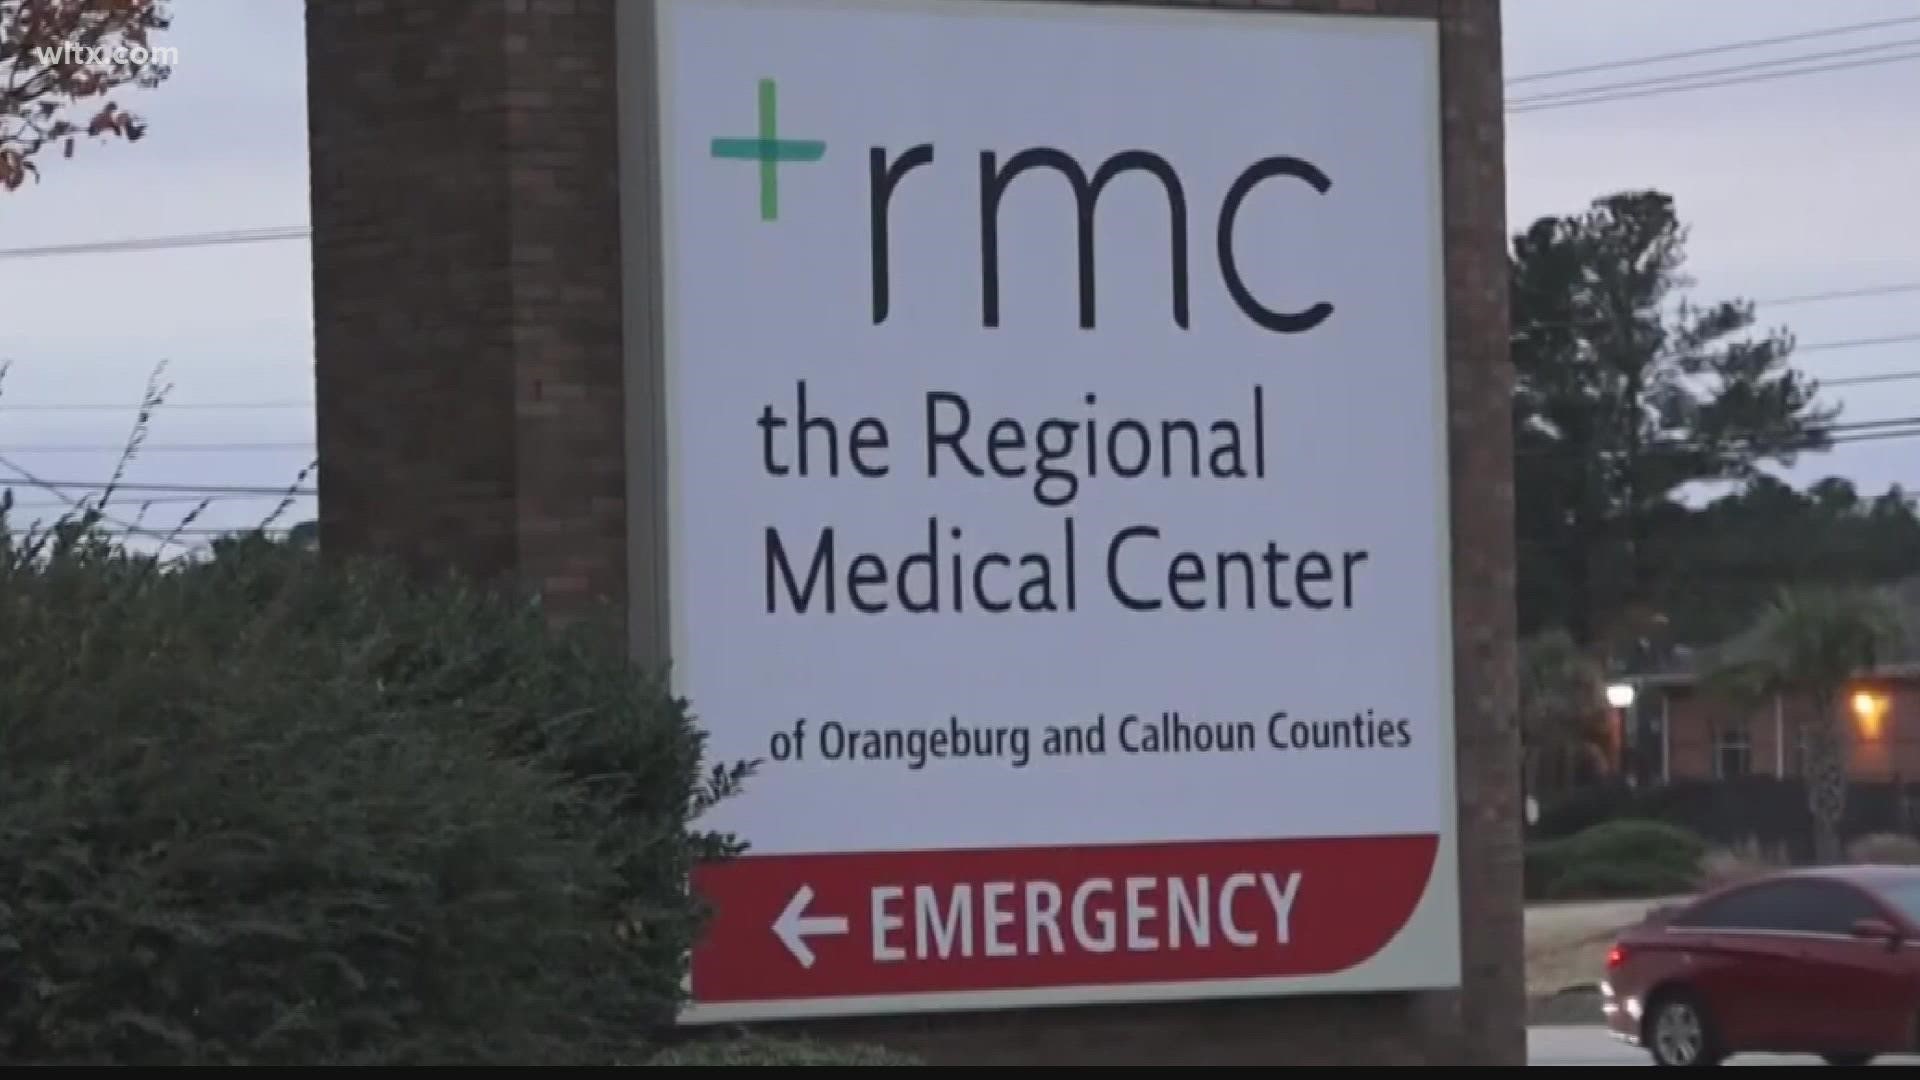 The Regional medical center is in the process of coming up with a plan for residents of the Orangeburg, Calhoun, and Bamberg communities.